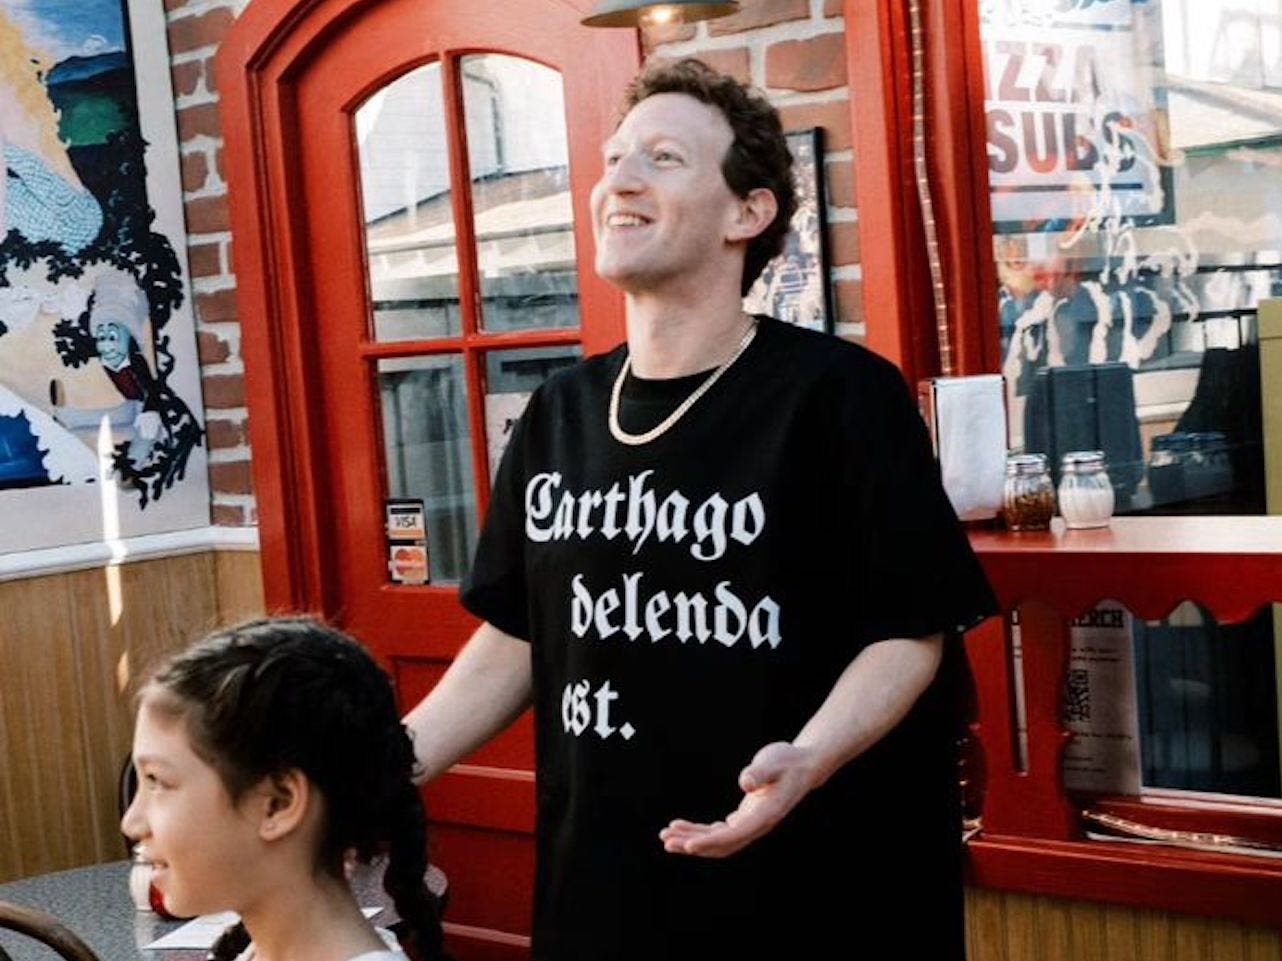 Zuck's birthday t-shirt is a tribute to ancient Rome, Facebook's history, and going hard